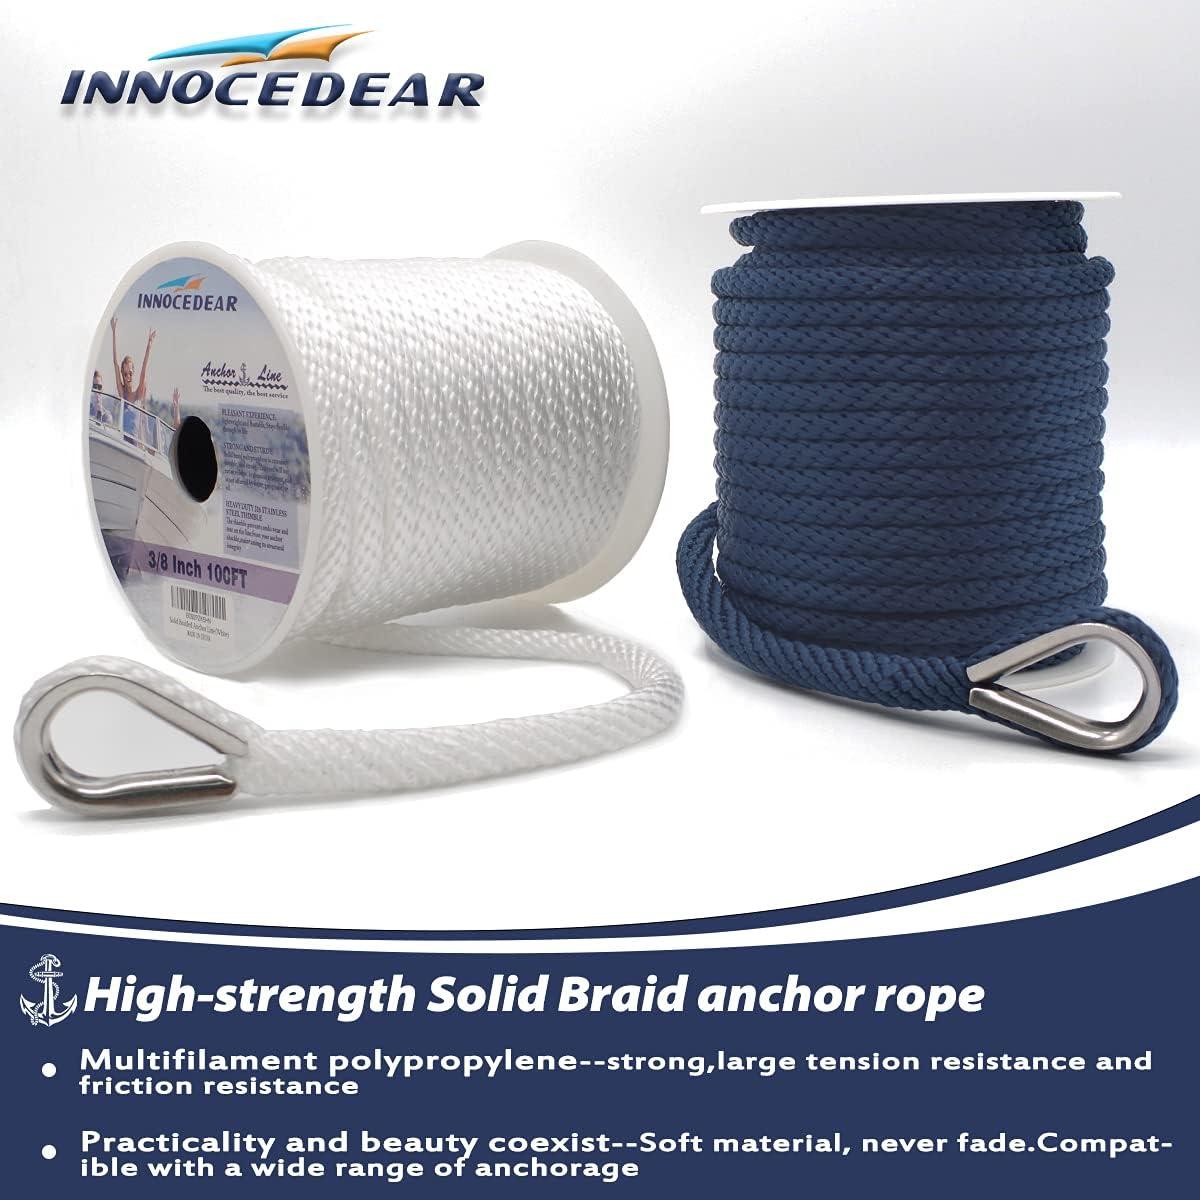 INNOCEDEAR Anchor Rope Braided Anchor Line(Navy, 3/8 x 100') Premium Solid  Braid MFP Boat Rope with Stainless Steel Thimble, Quality Marine Rope, Boat  Accessories